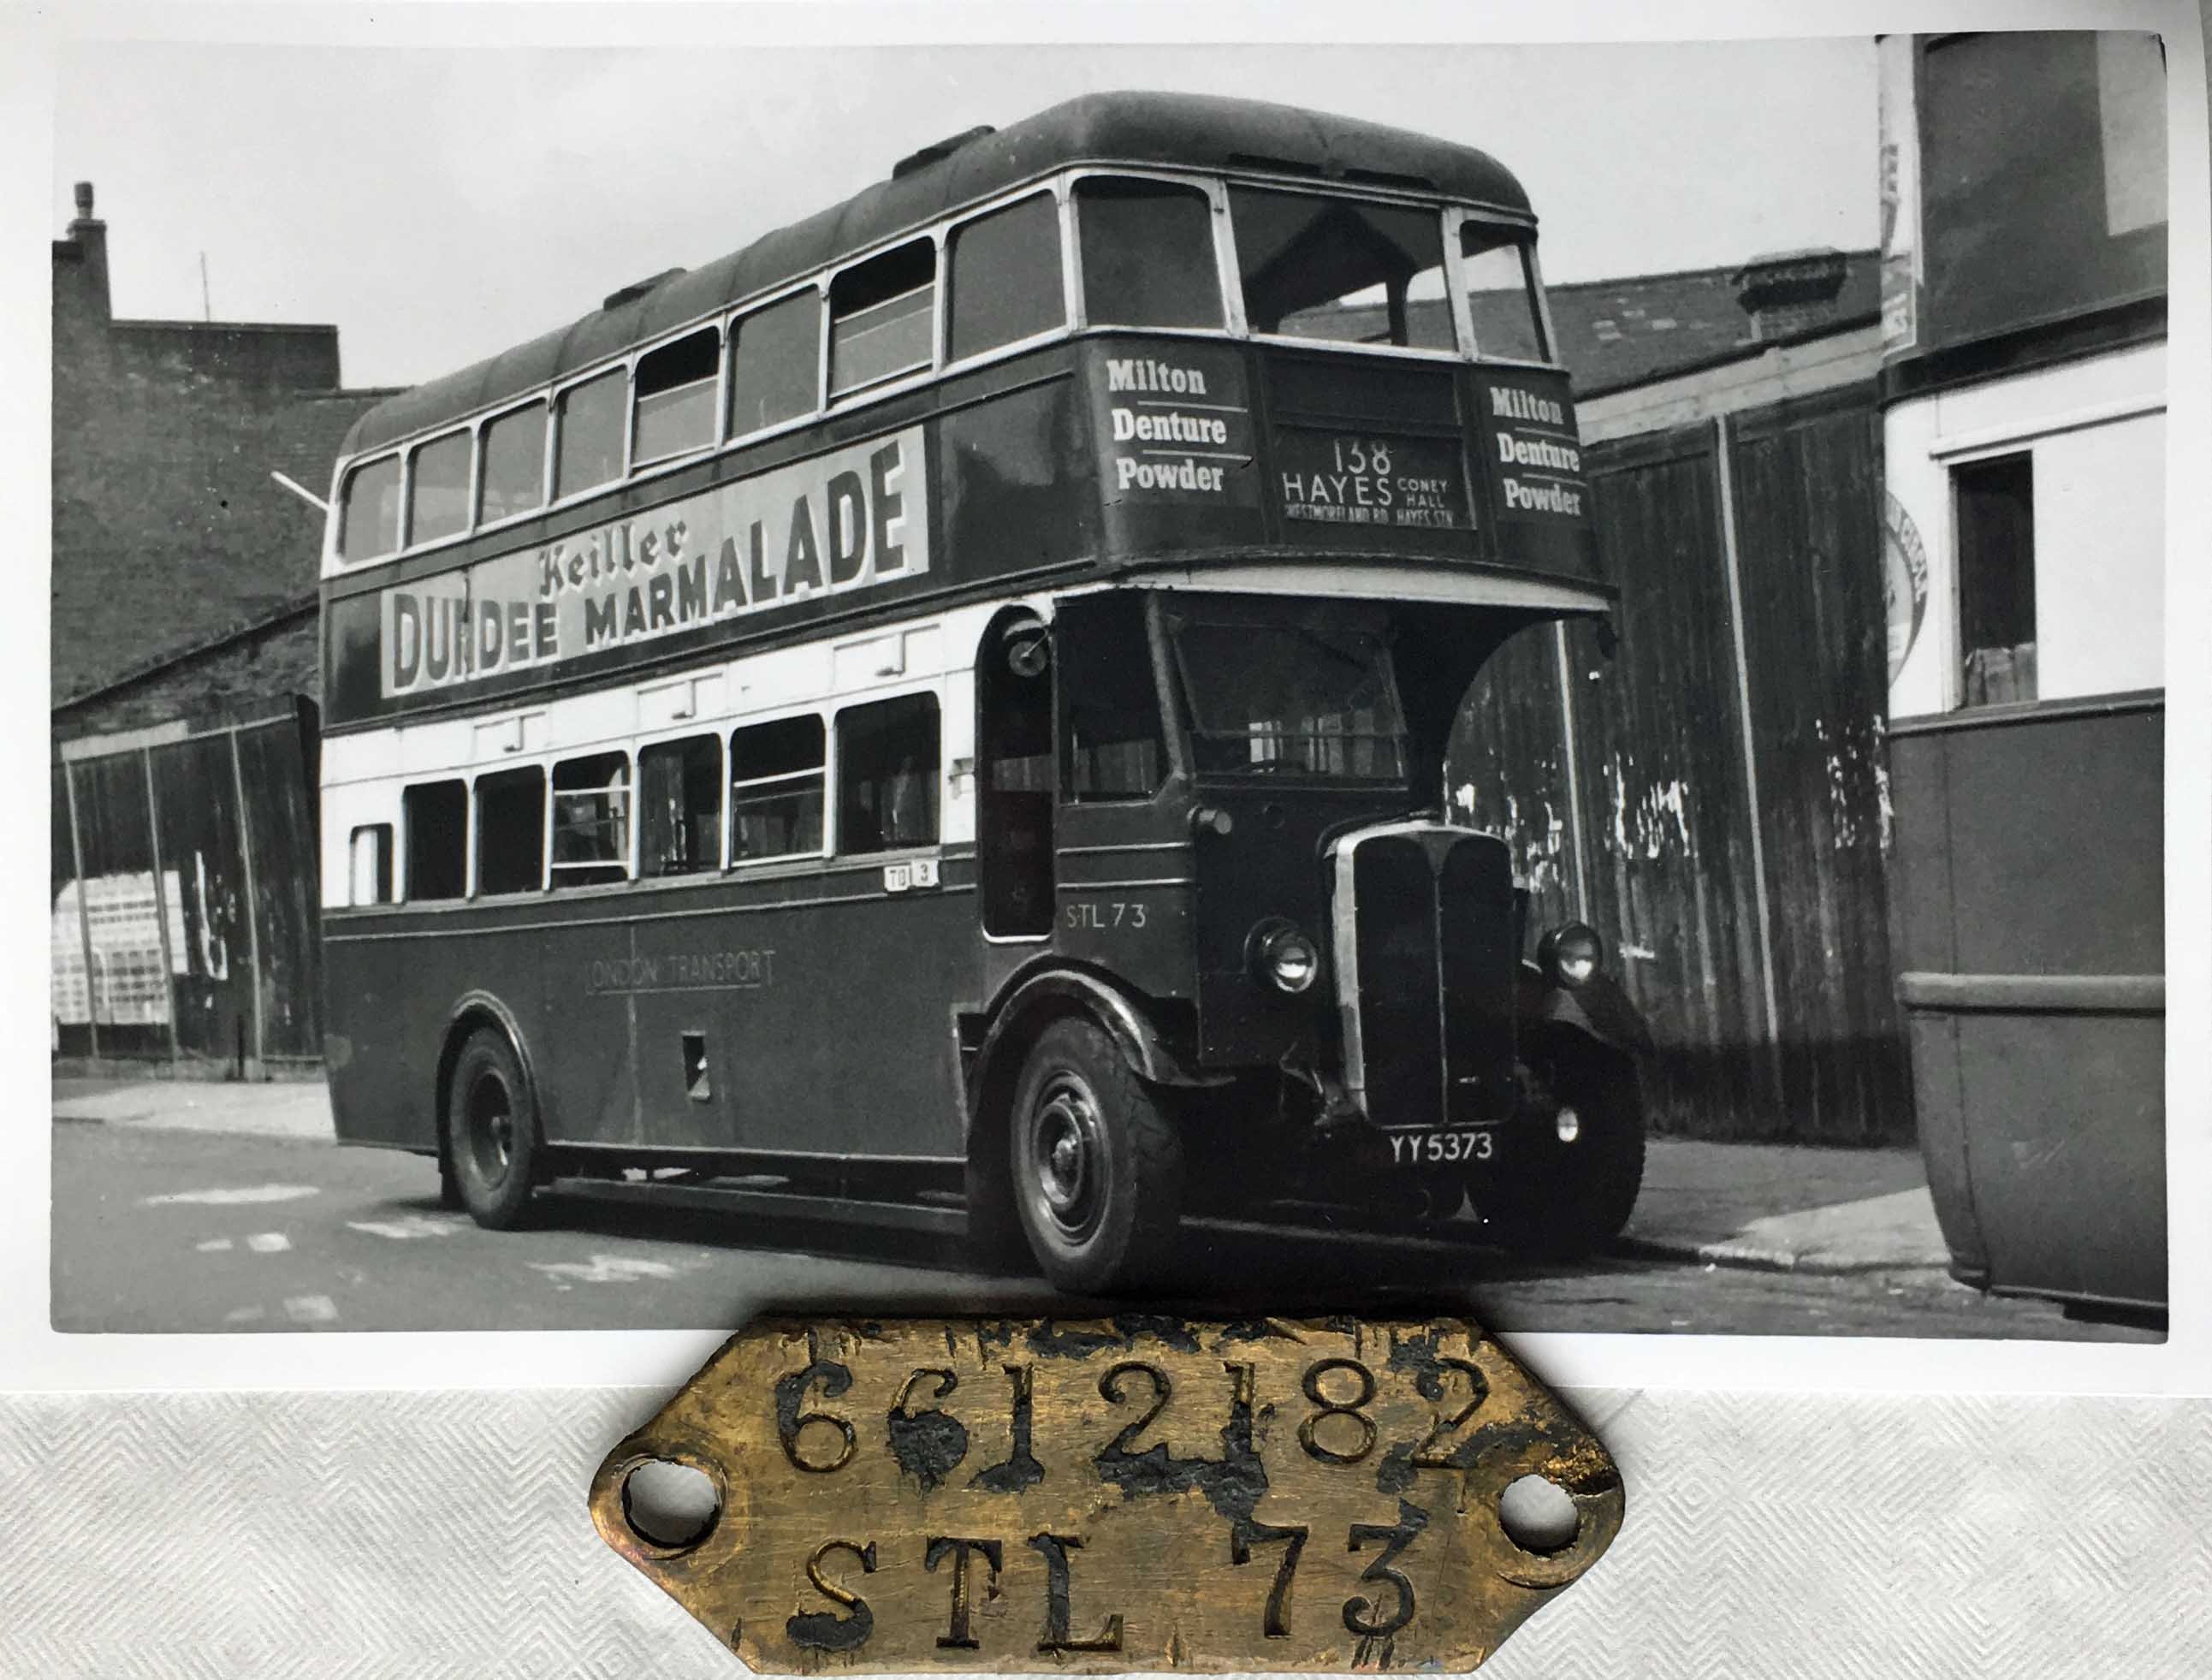 London Transport brass CHASSIS TAG, aka a DUMB-IRON PLATE, for double-deck bus STL 73 accompanied by